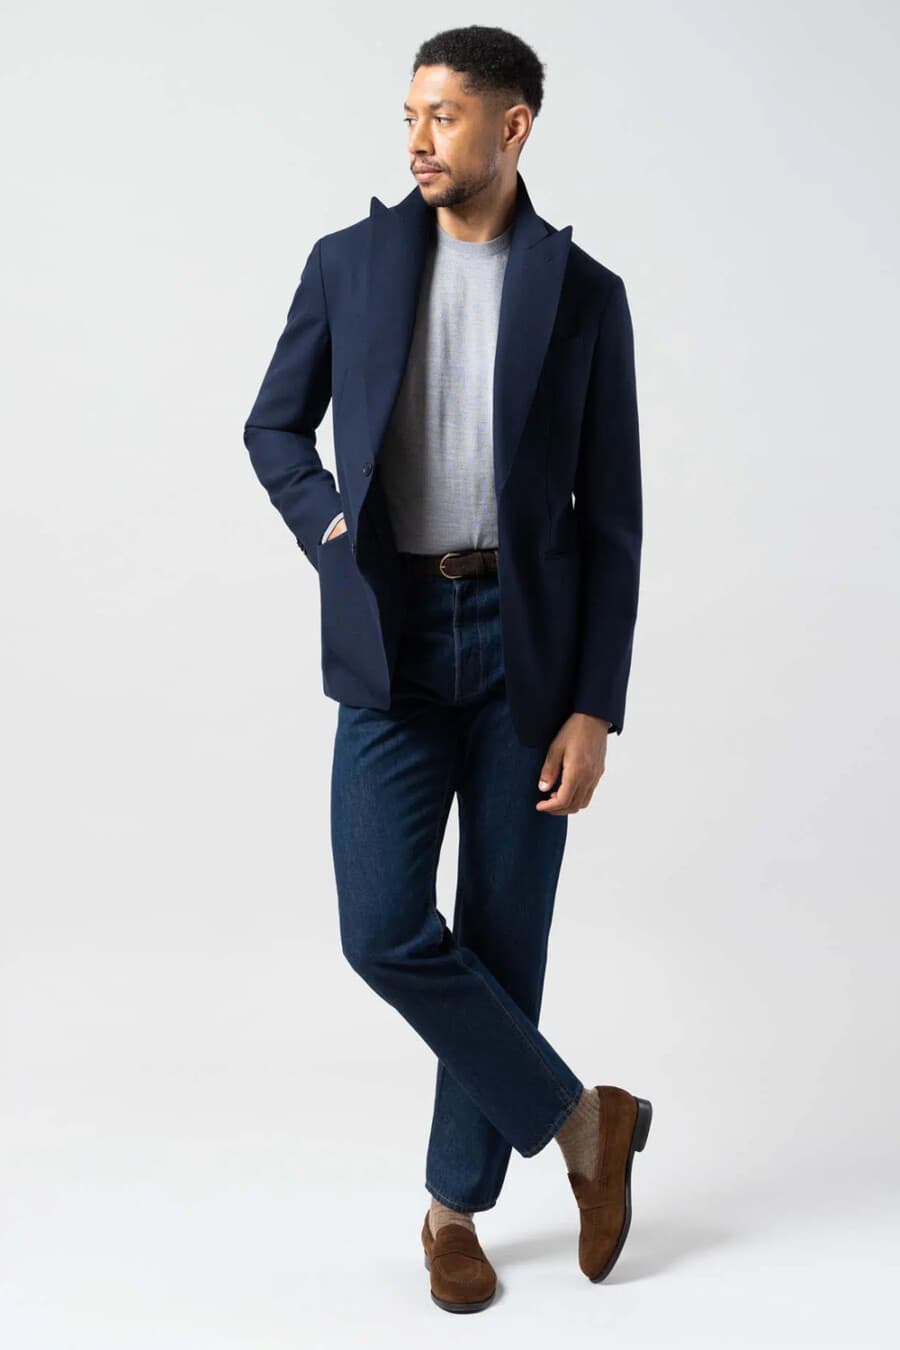 Men's Navy peak lapel blazer, dark jeans, grey tucked in T-shirt, brown socks and brown suede penny loafers outfit